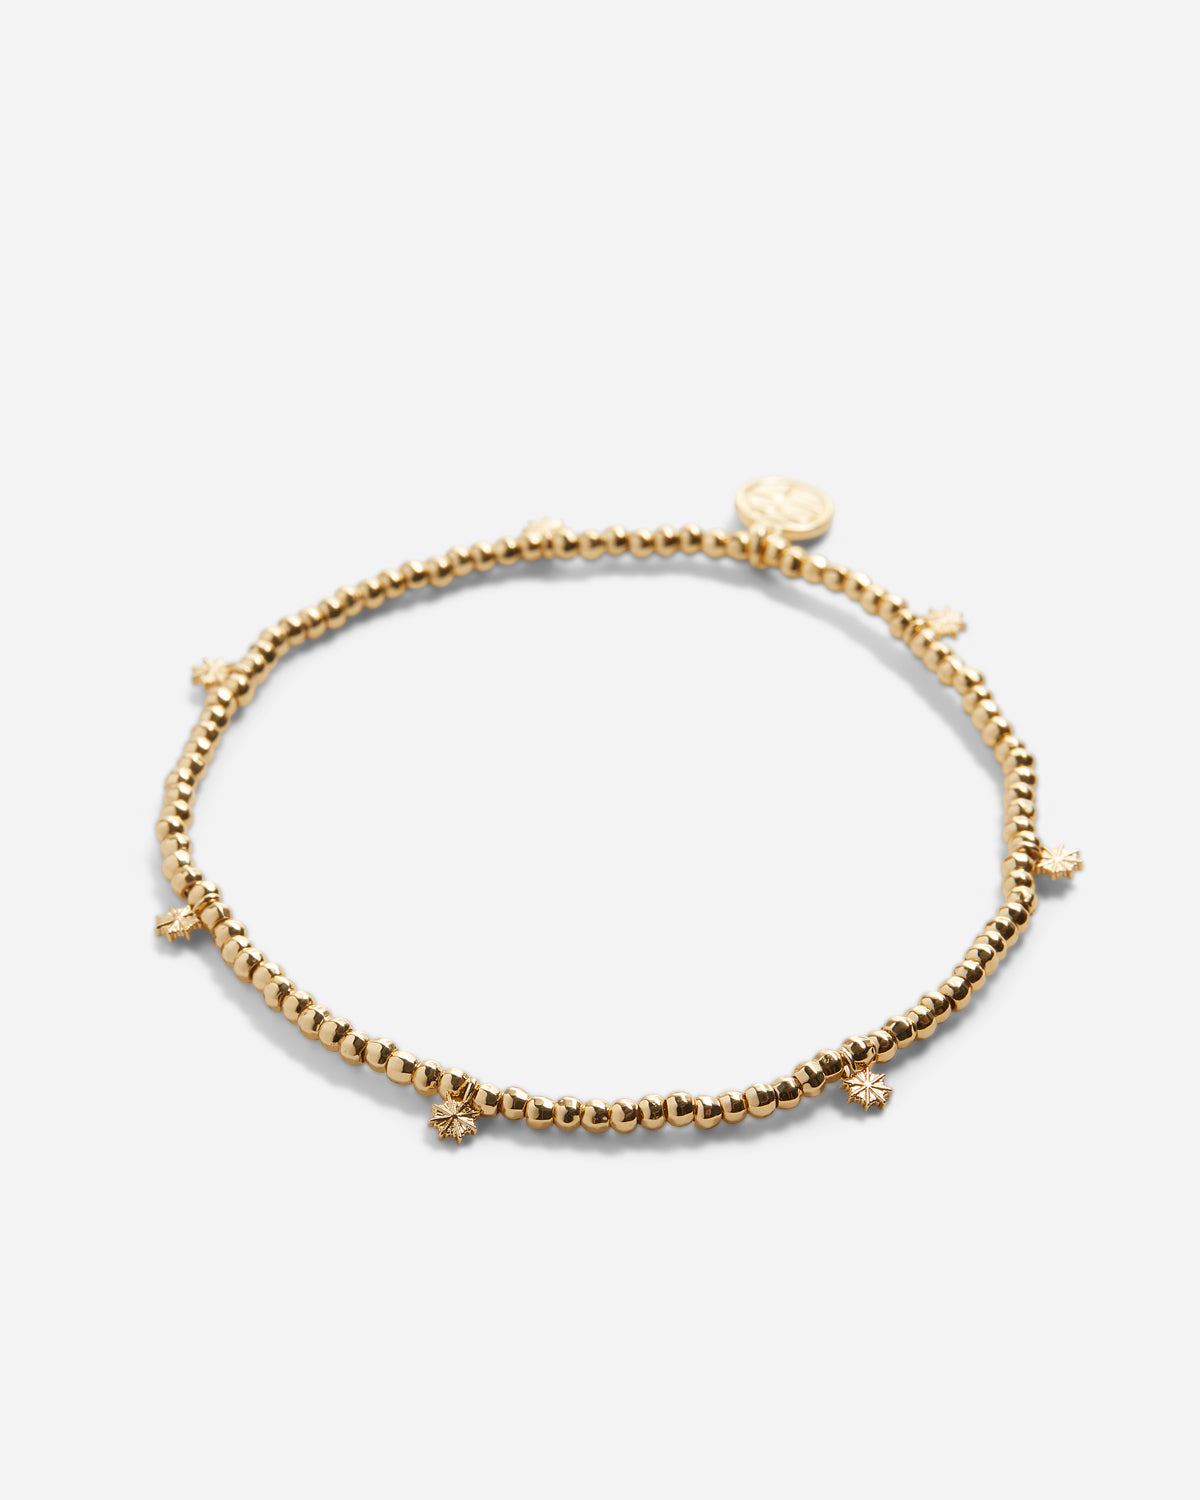 Close-up of Strength Beaded Icon Bracelet in 14k gold finish